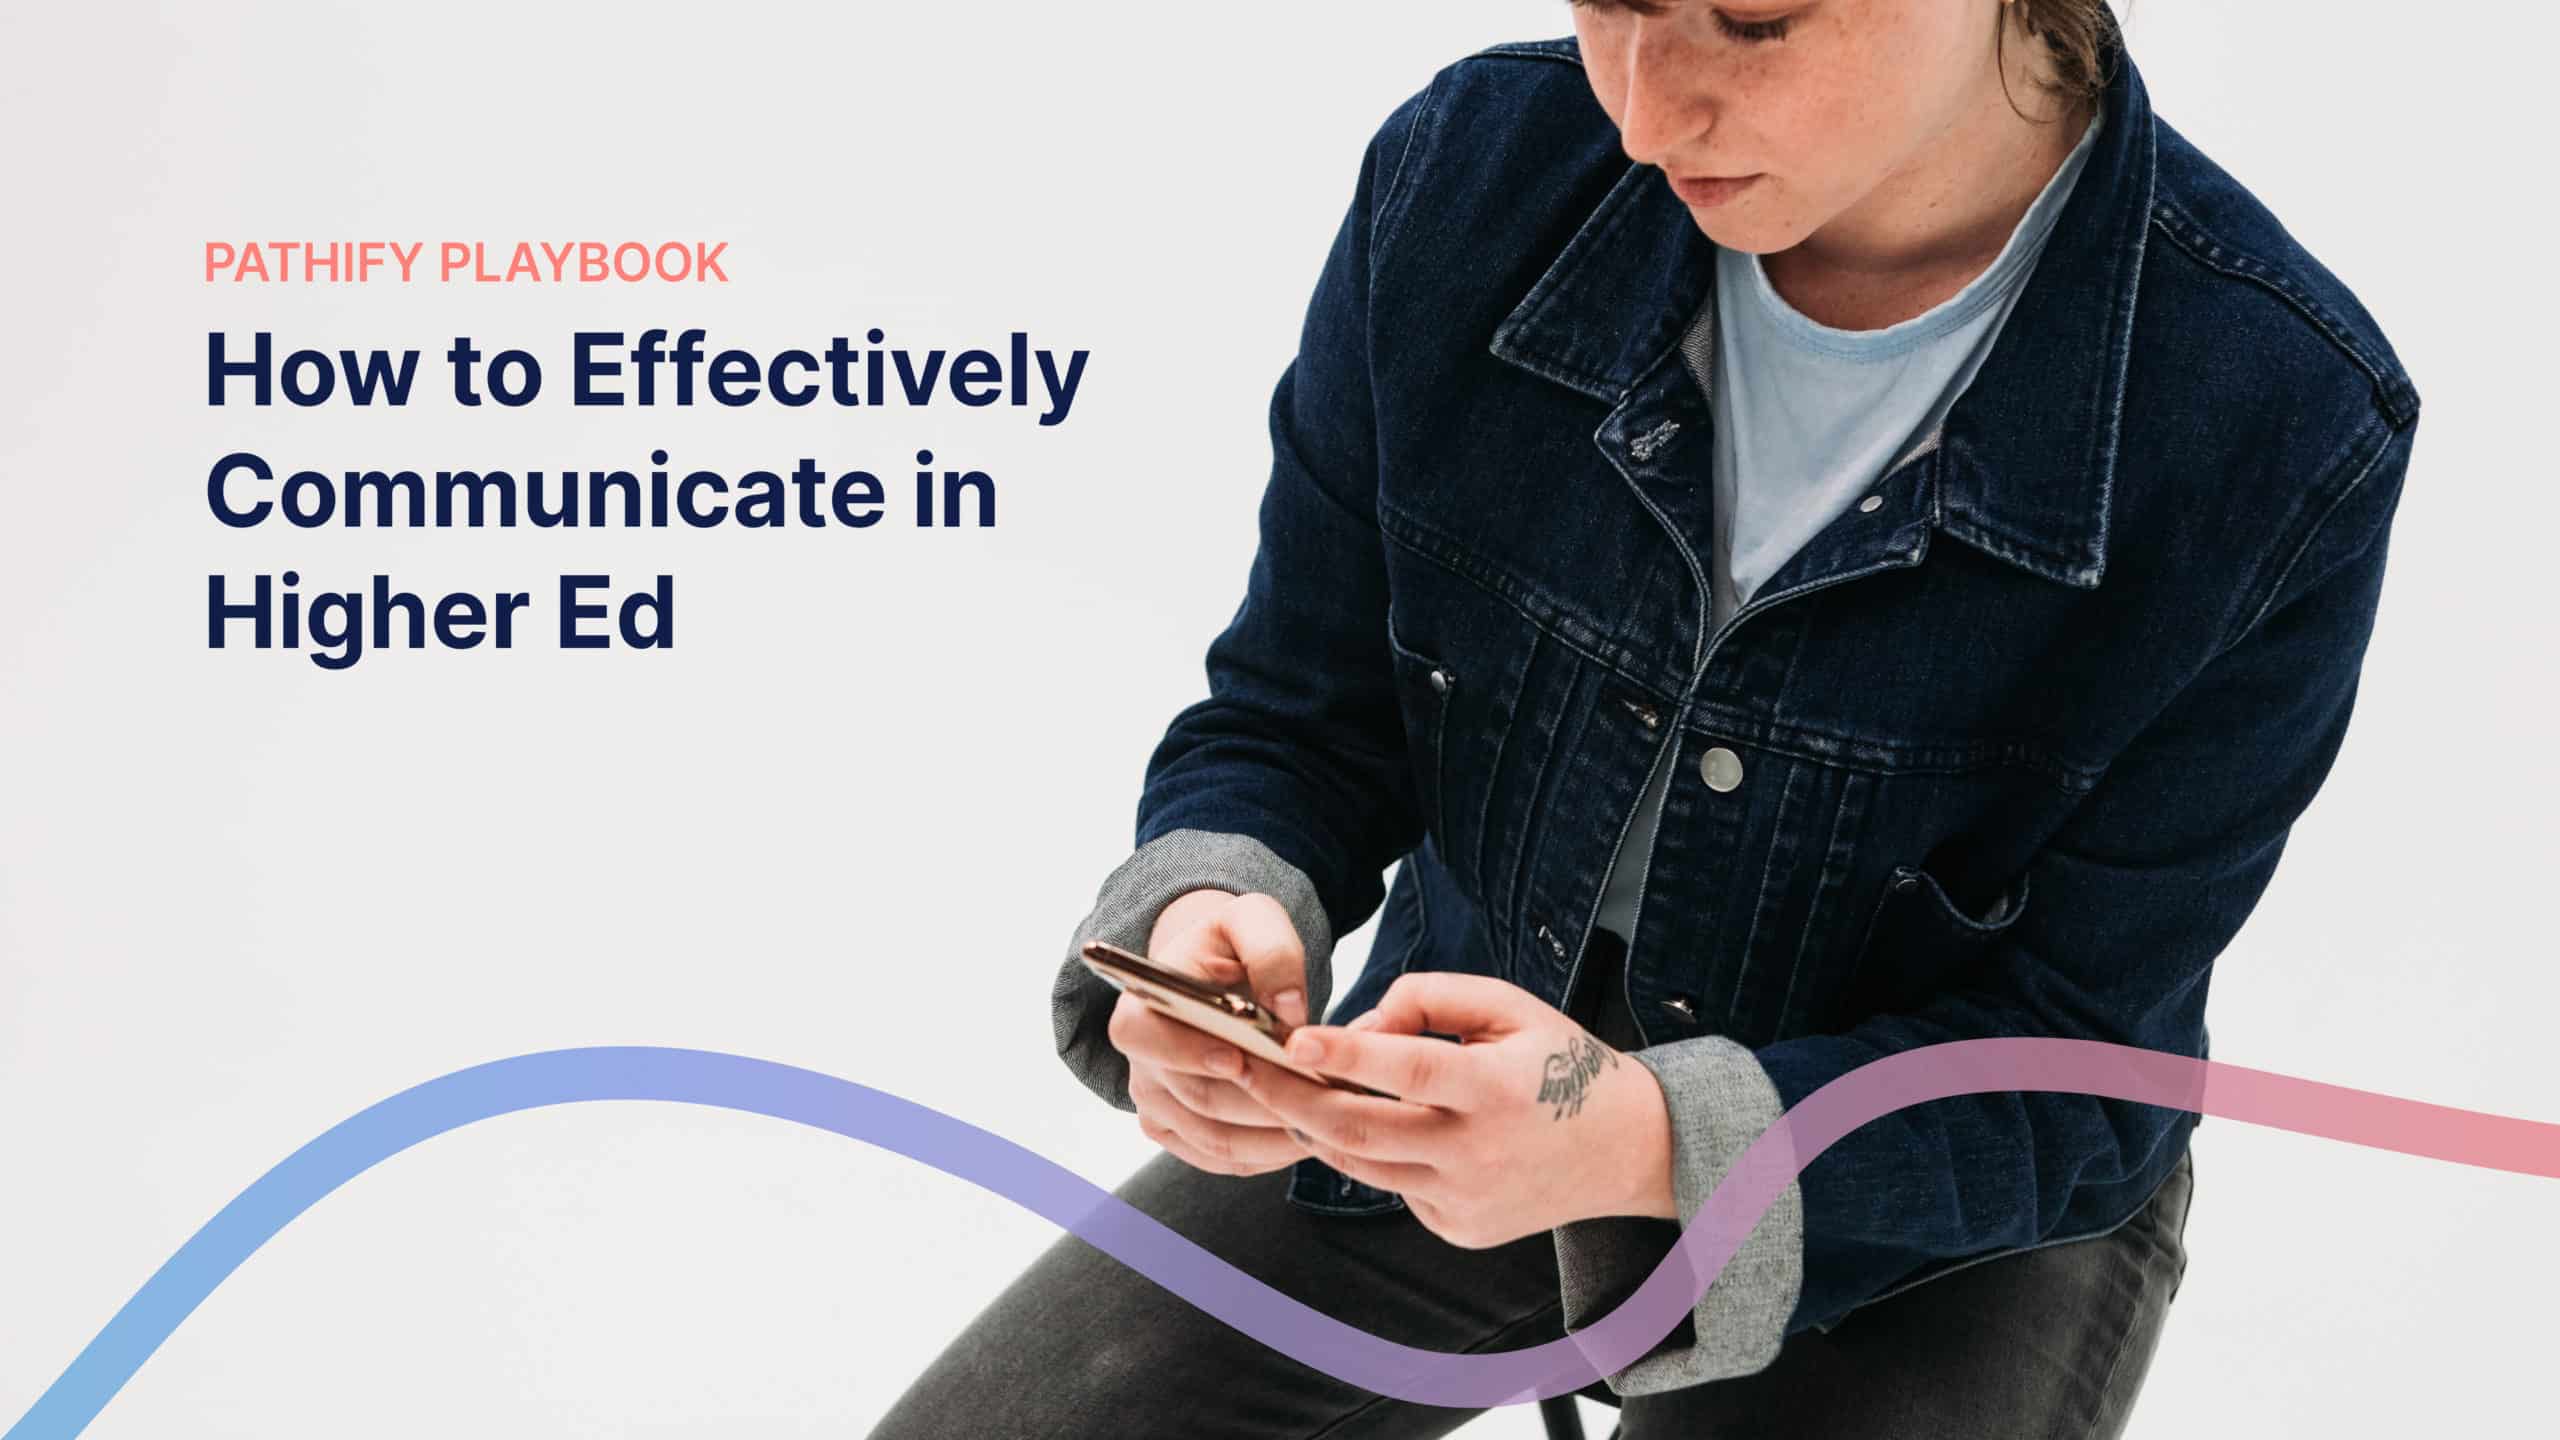 How to Effectively Communicate in Higher Ed - Pathify Playbook